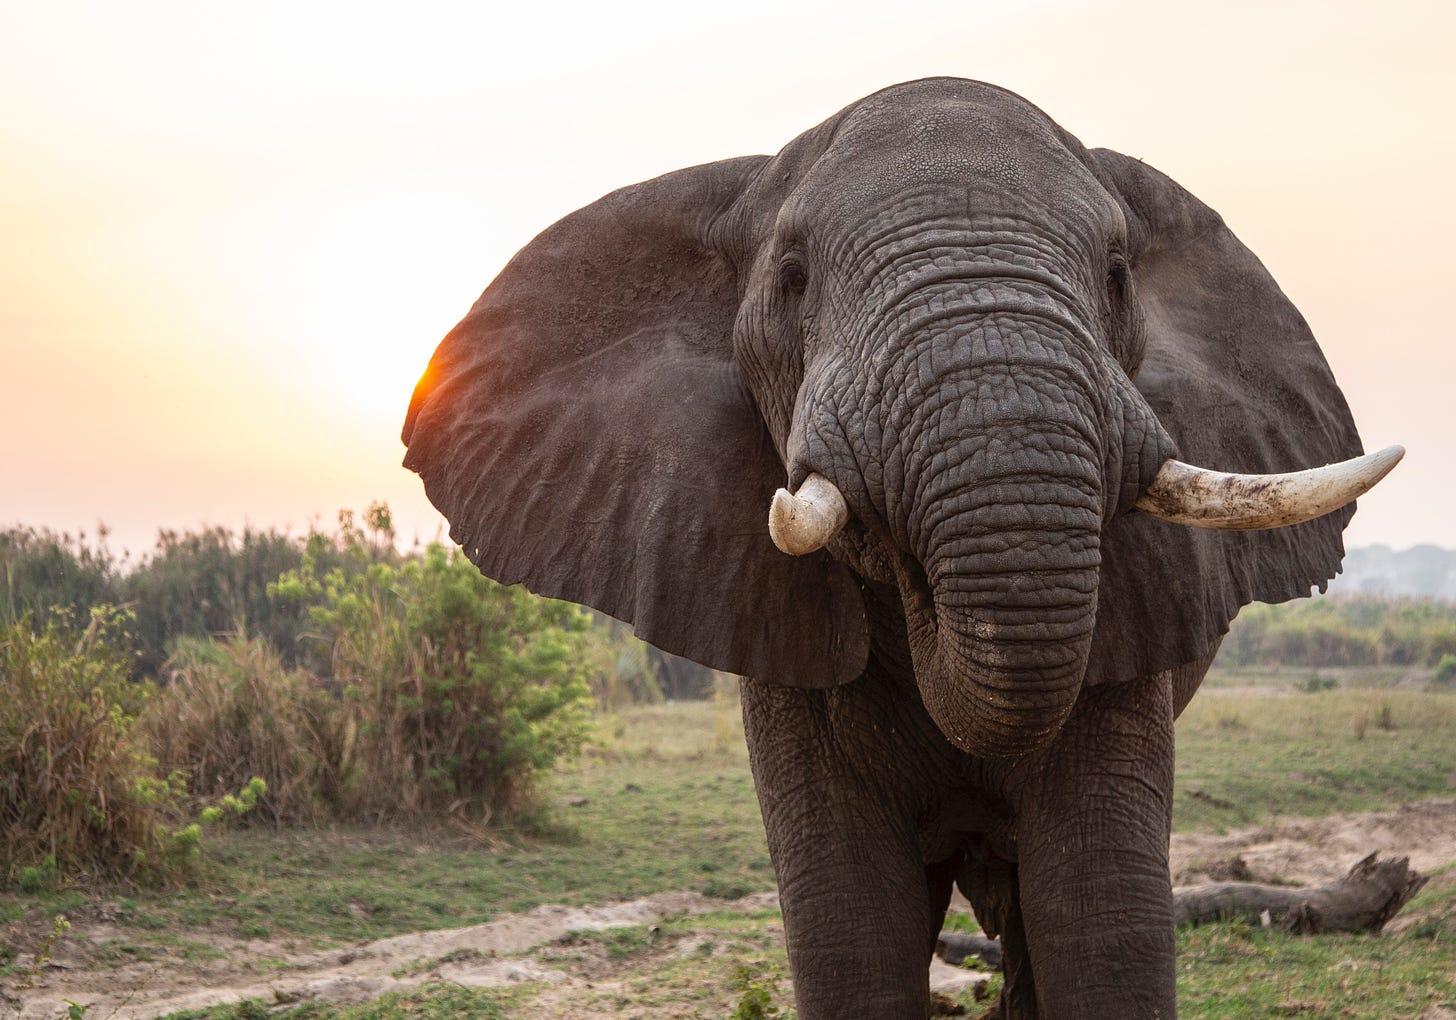 An elephant walking toward the camera, trunk tucked into their mouth